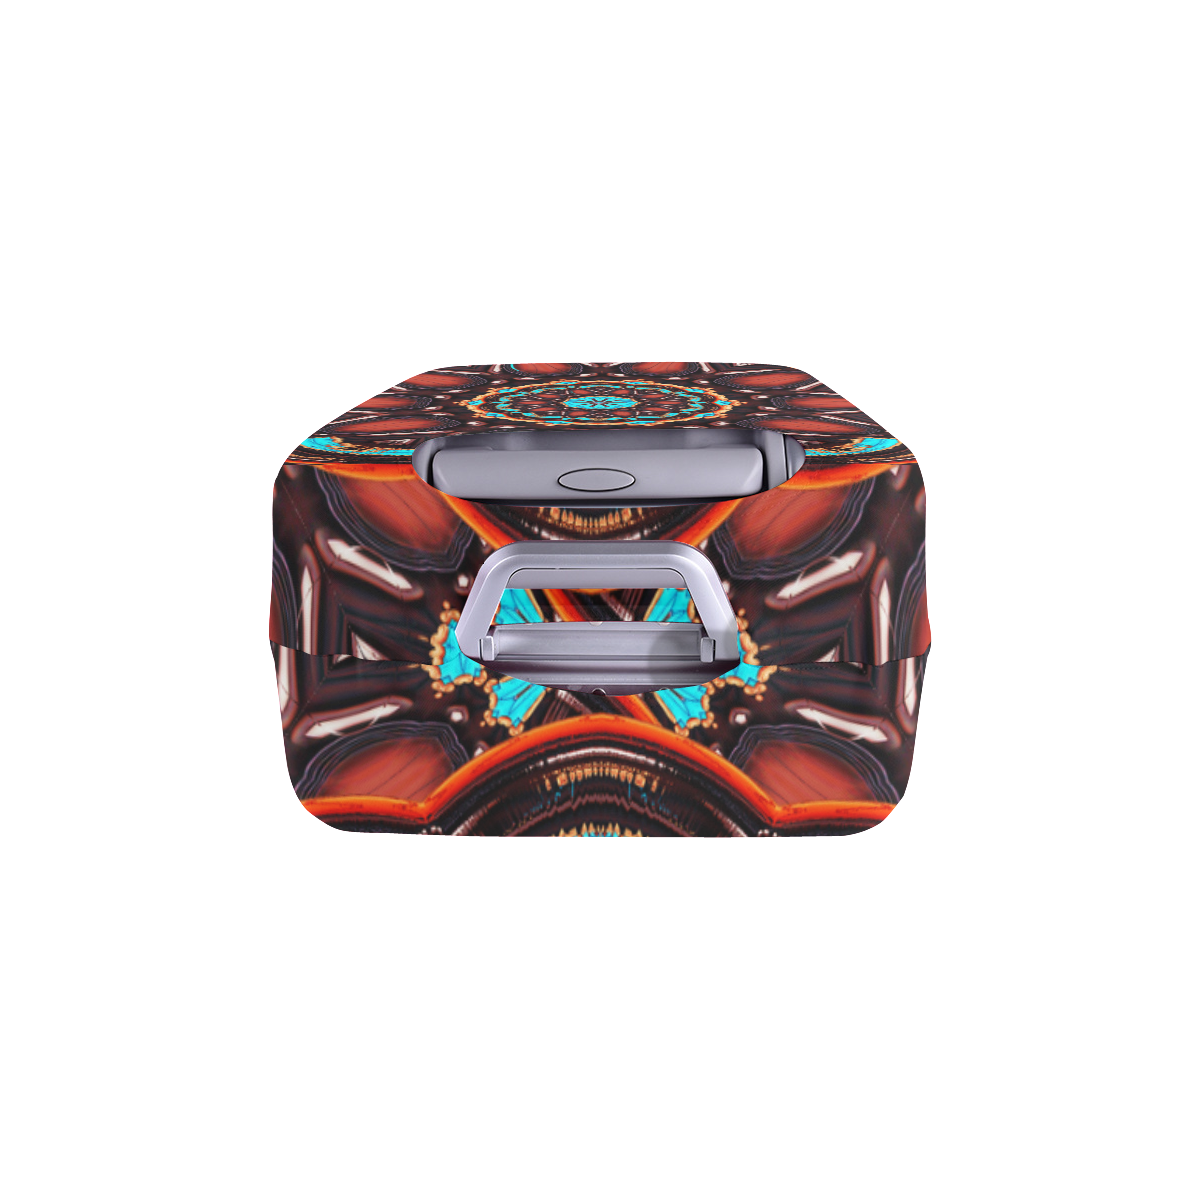 K172 Wood and Turquoise Abstract Luggage Cover/Large 26"-28"